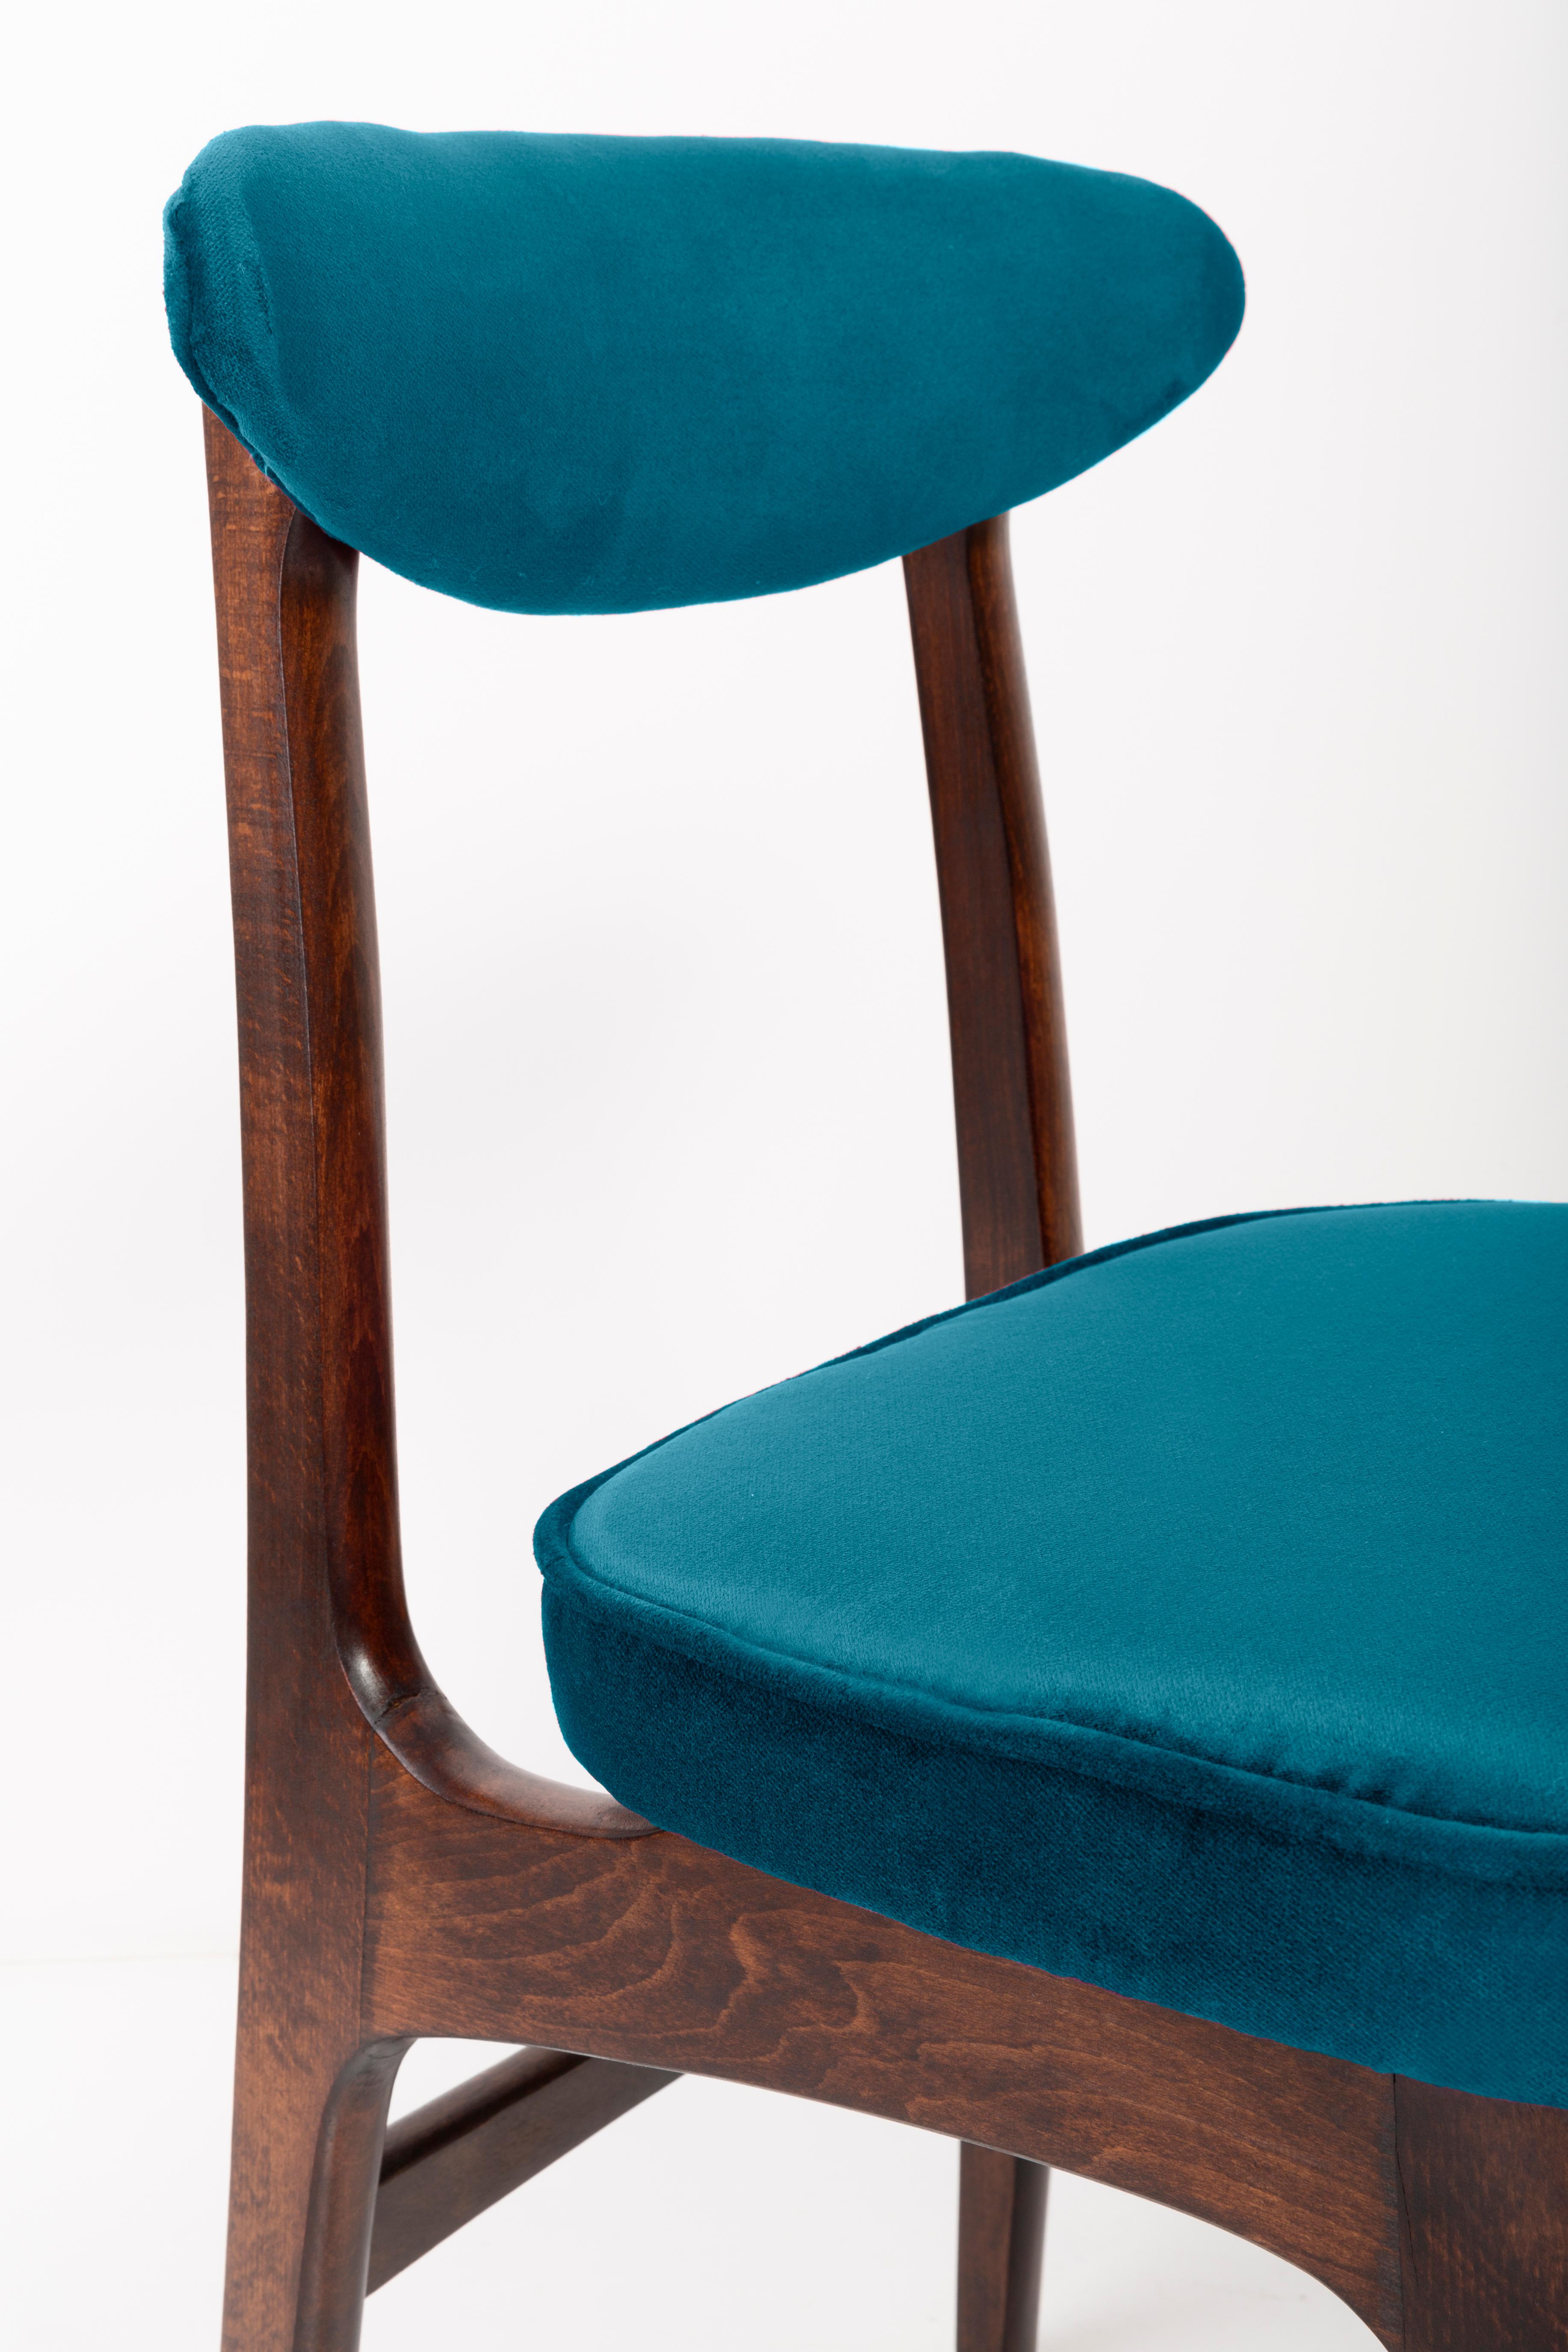 Hand-Crafted Mid Century Petrol Blue Velvet Chair designed by Rajmund Halas, Europe, 1960s For Sale